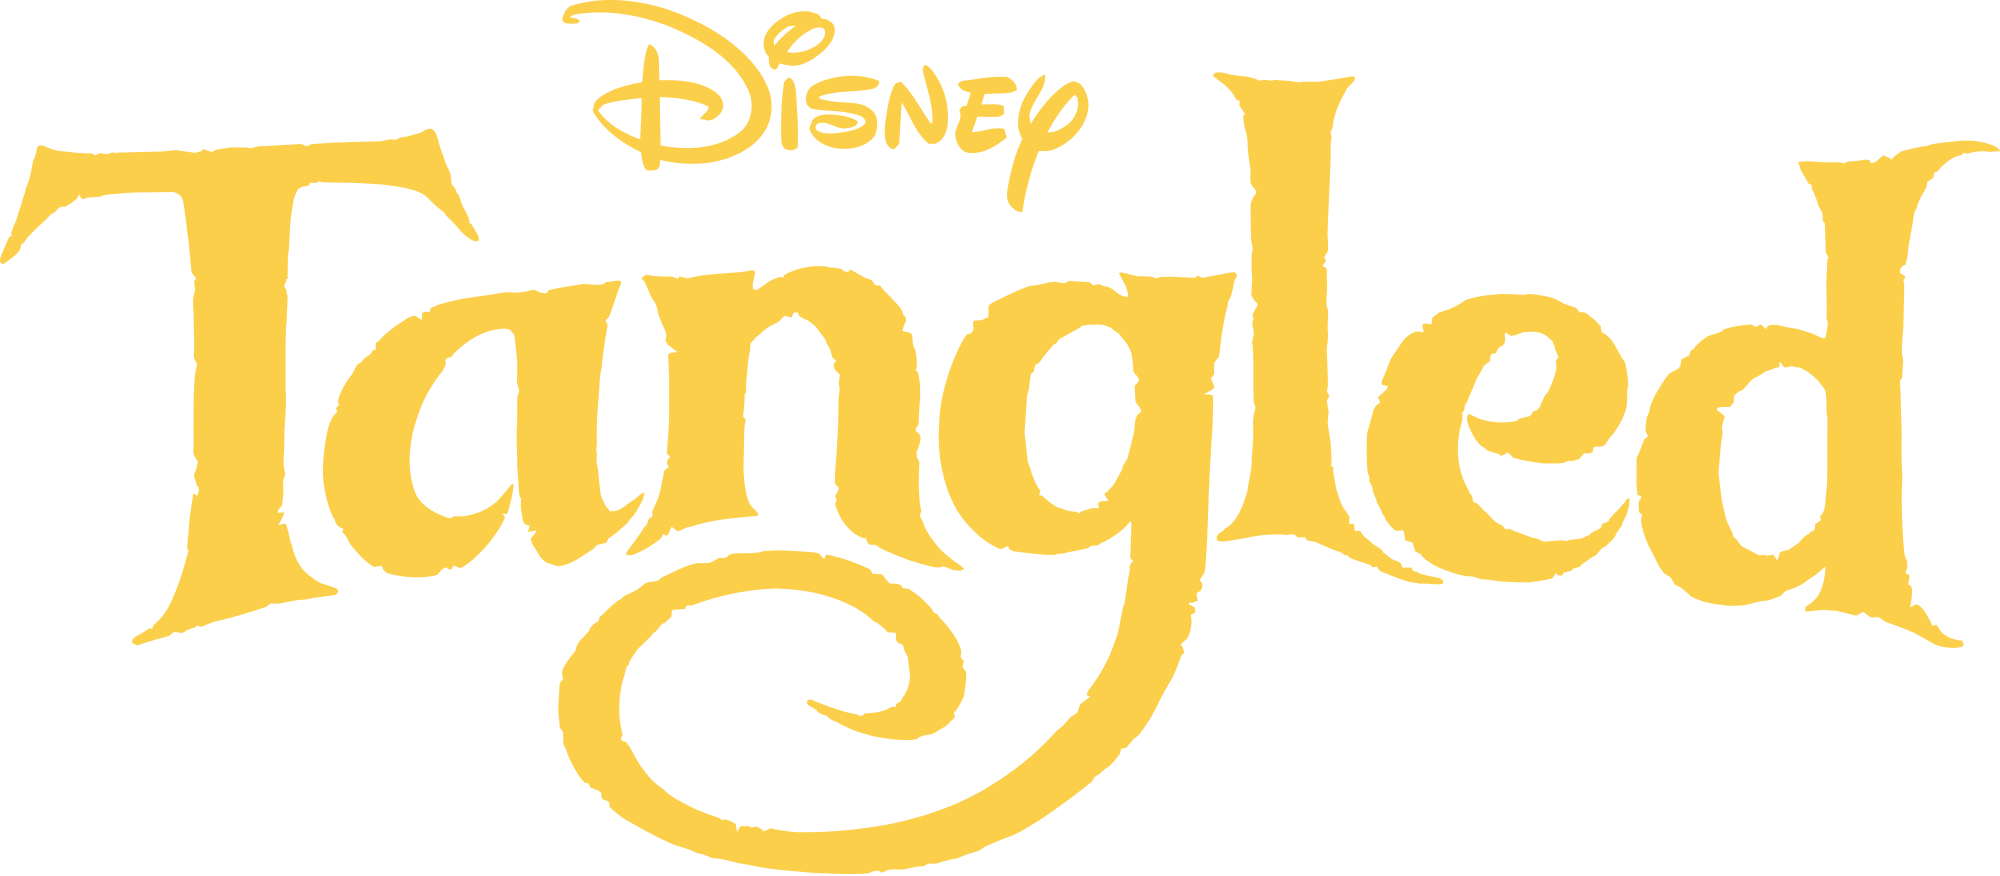 What was the name of the kingdom in Tangled?